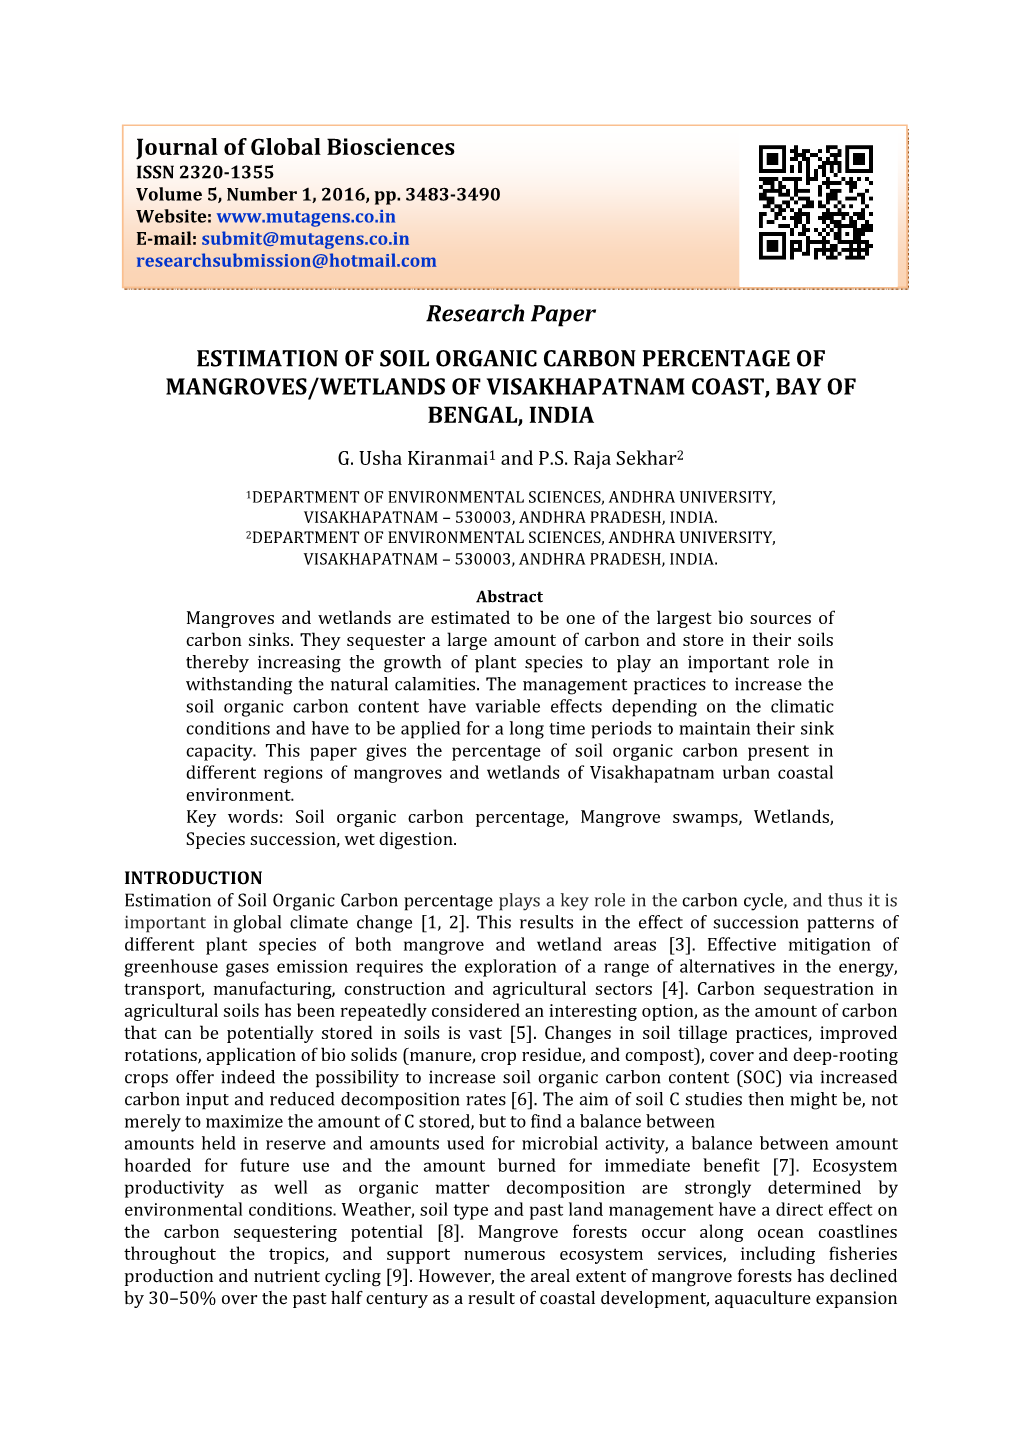 Research Paper ESTIMATION of SOIL ORGANIC CARBON PERCENTAGE of MANGROVES/WETLANDS of VISAKHAPATNAM COAST, BAY of BENGAL, INDIA